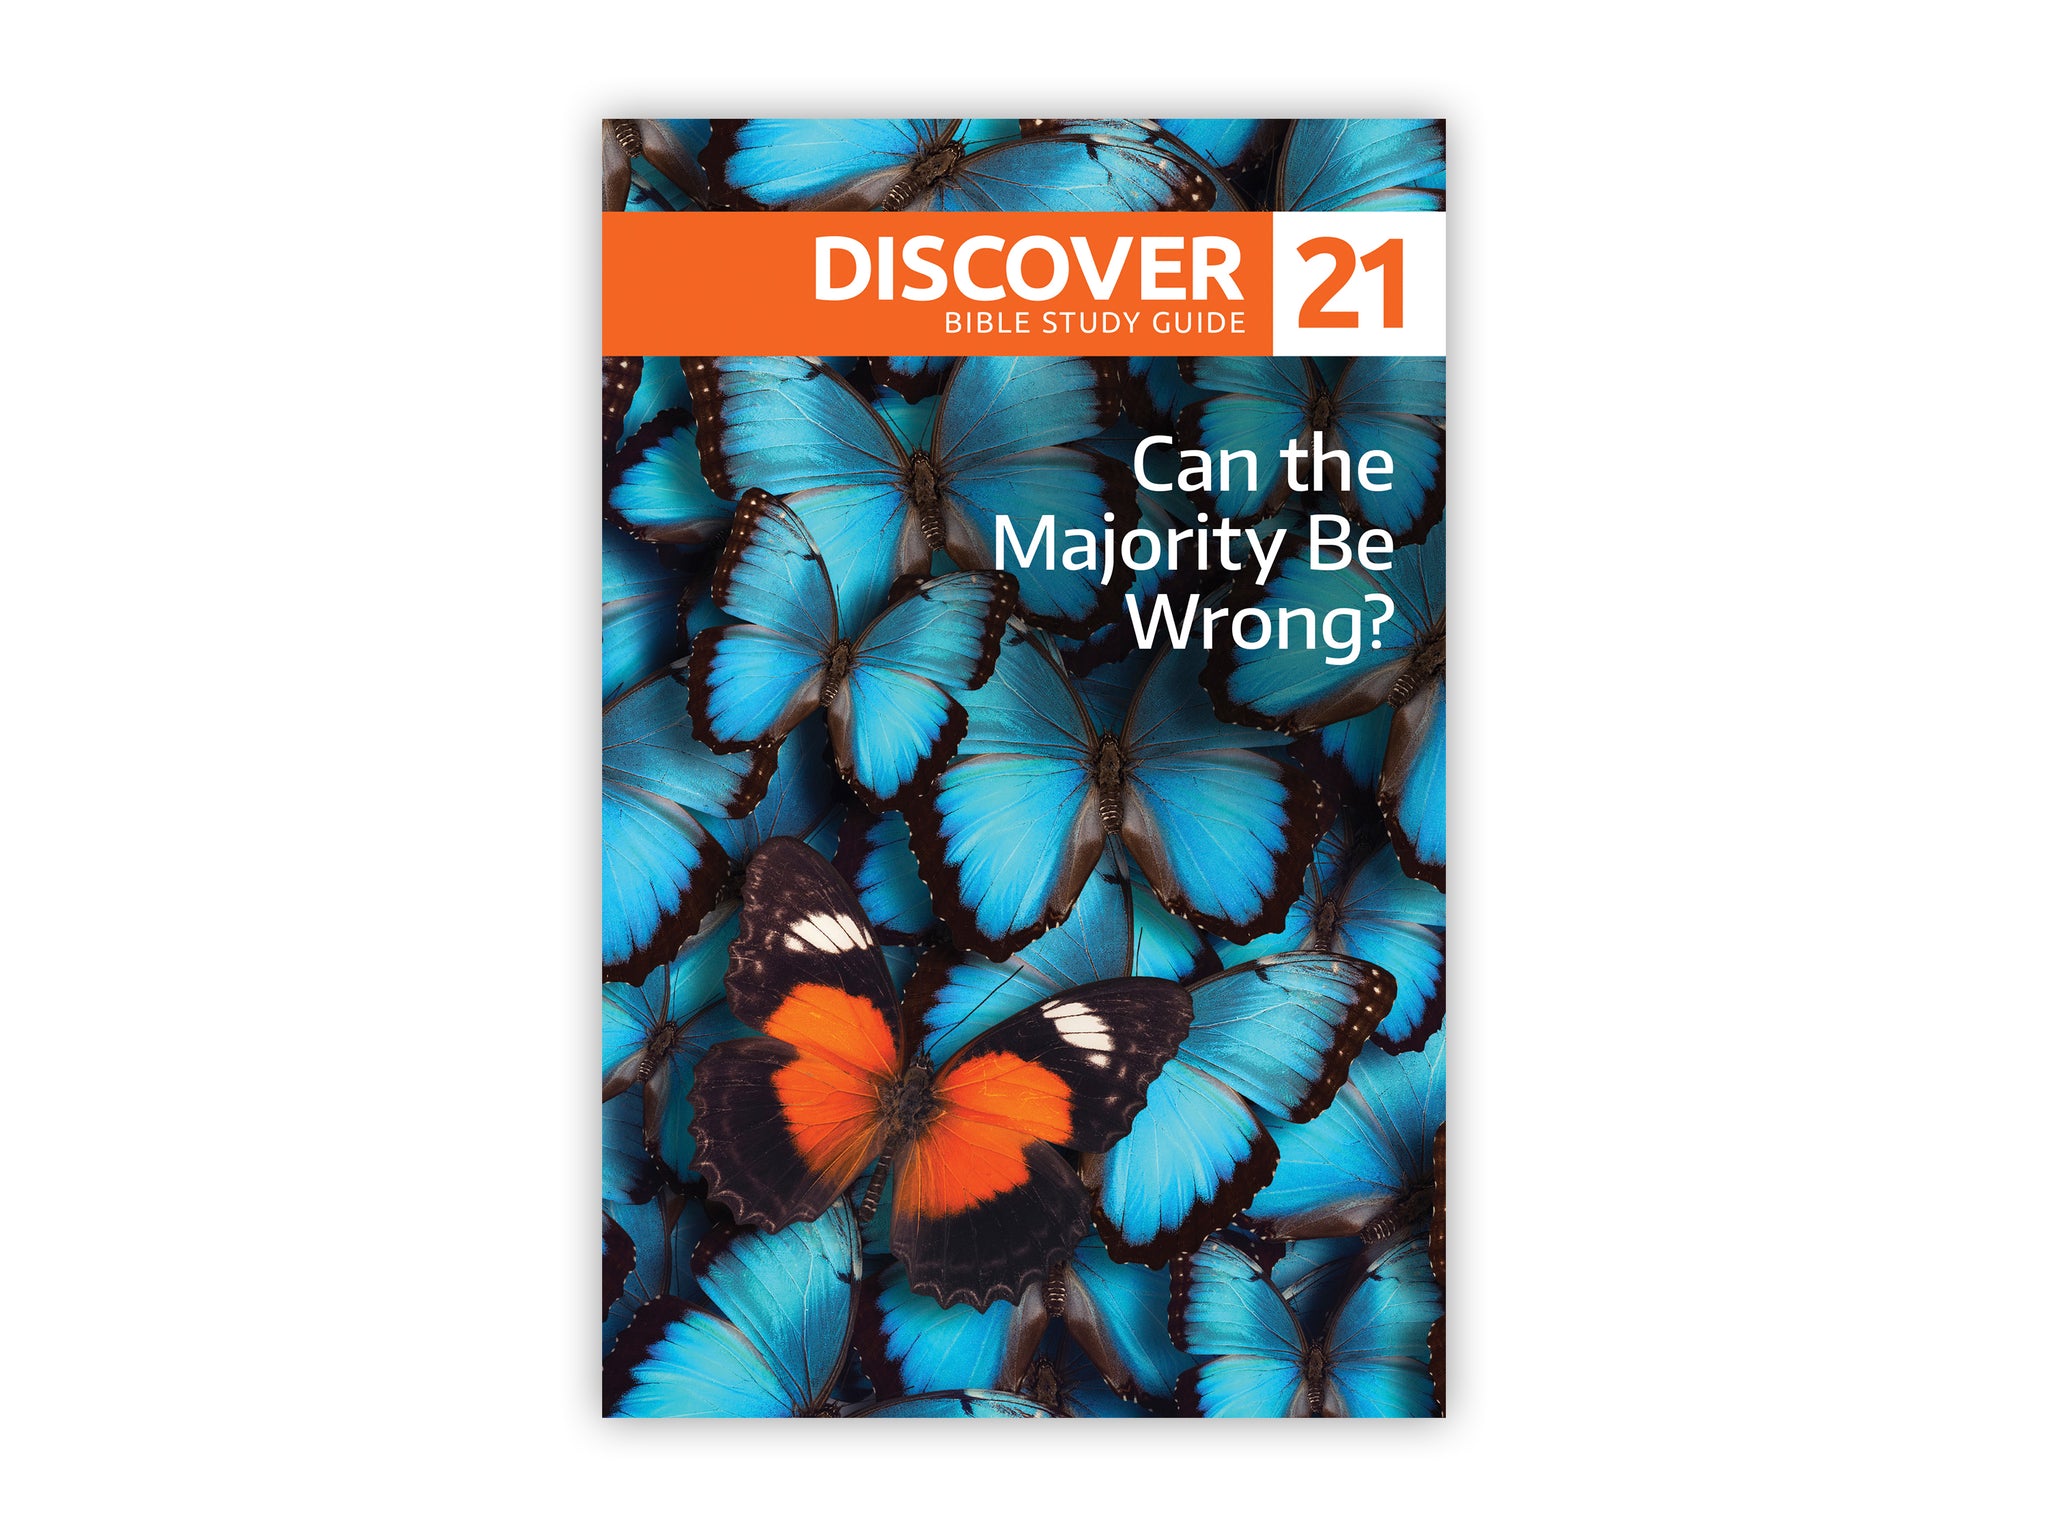 Discover Bible Study Guide #21 - Can the Majority Be Wrong?